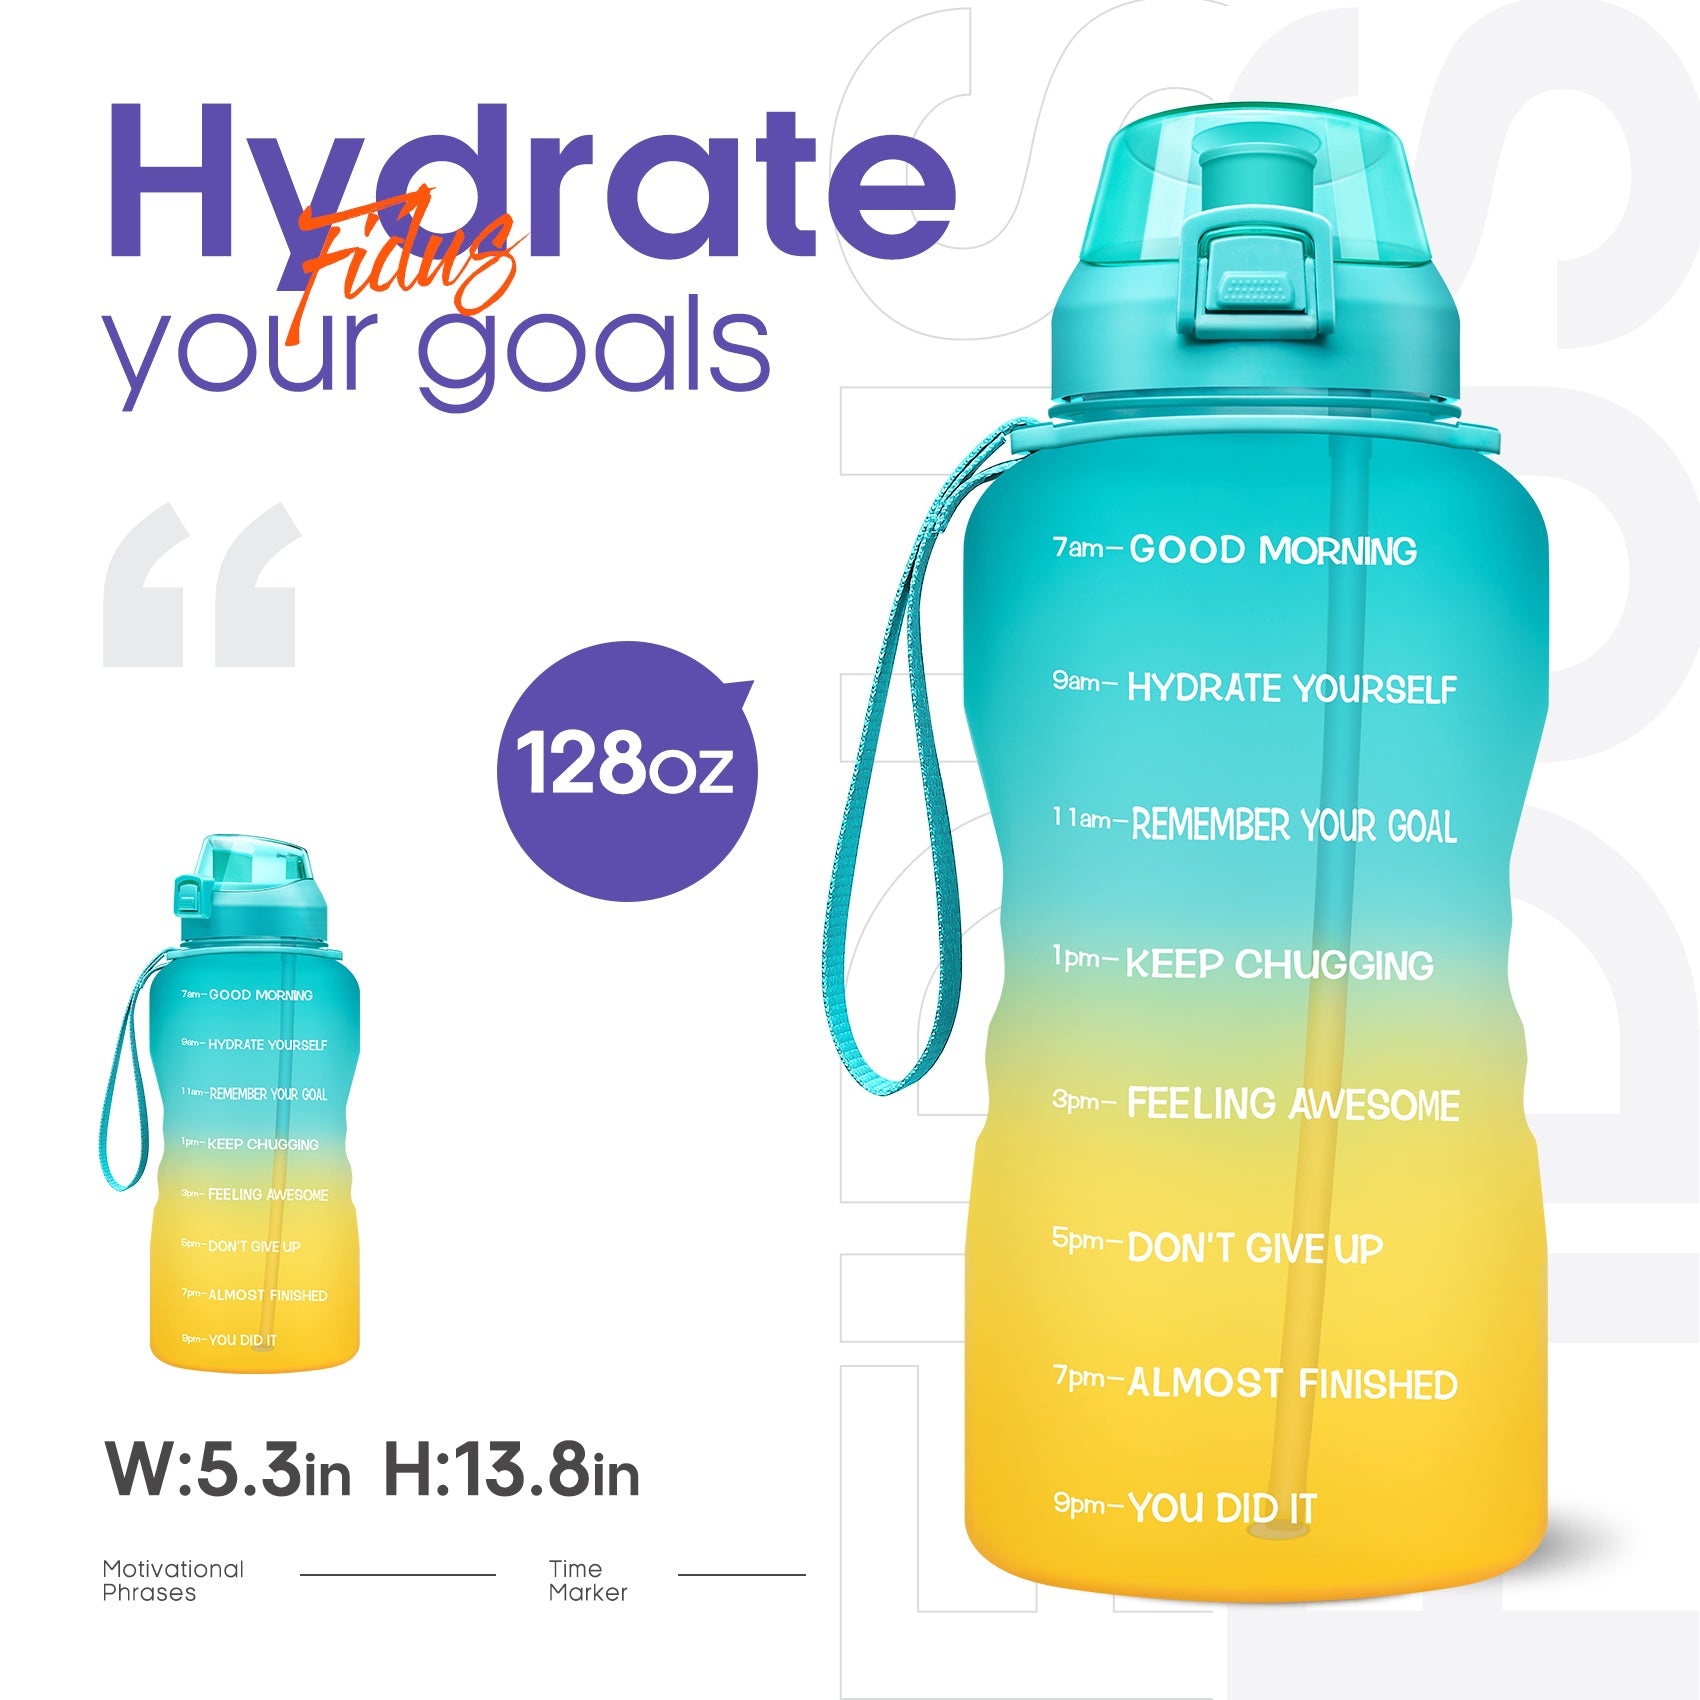 The Fidus Motivational Water Bottle is $24 and keeps you hydrated